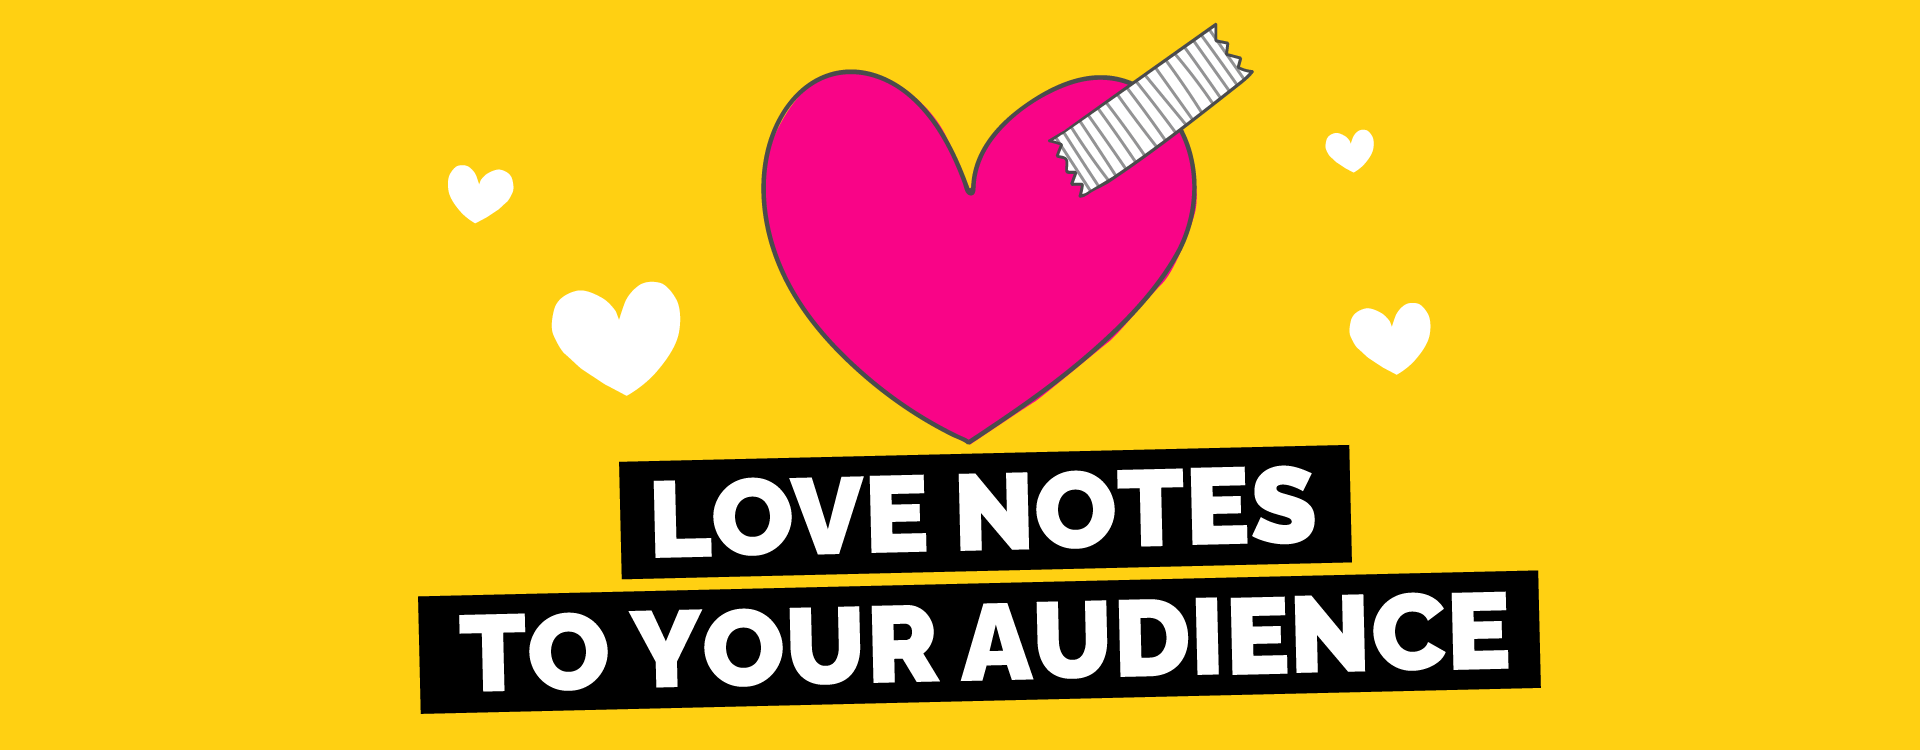 How Your Brand Can Flourish This Valentine’s Day